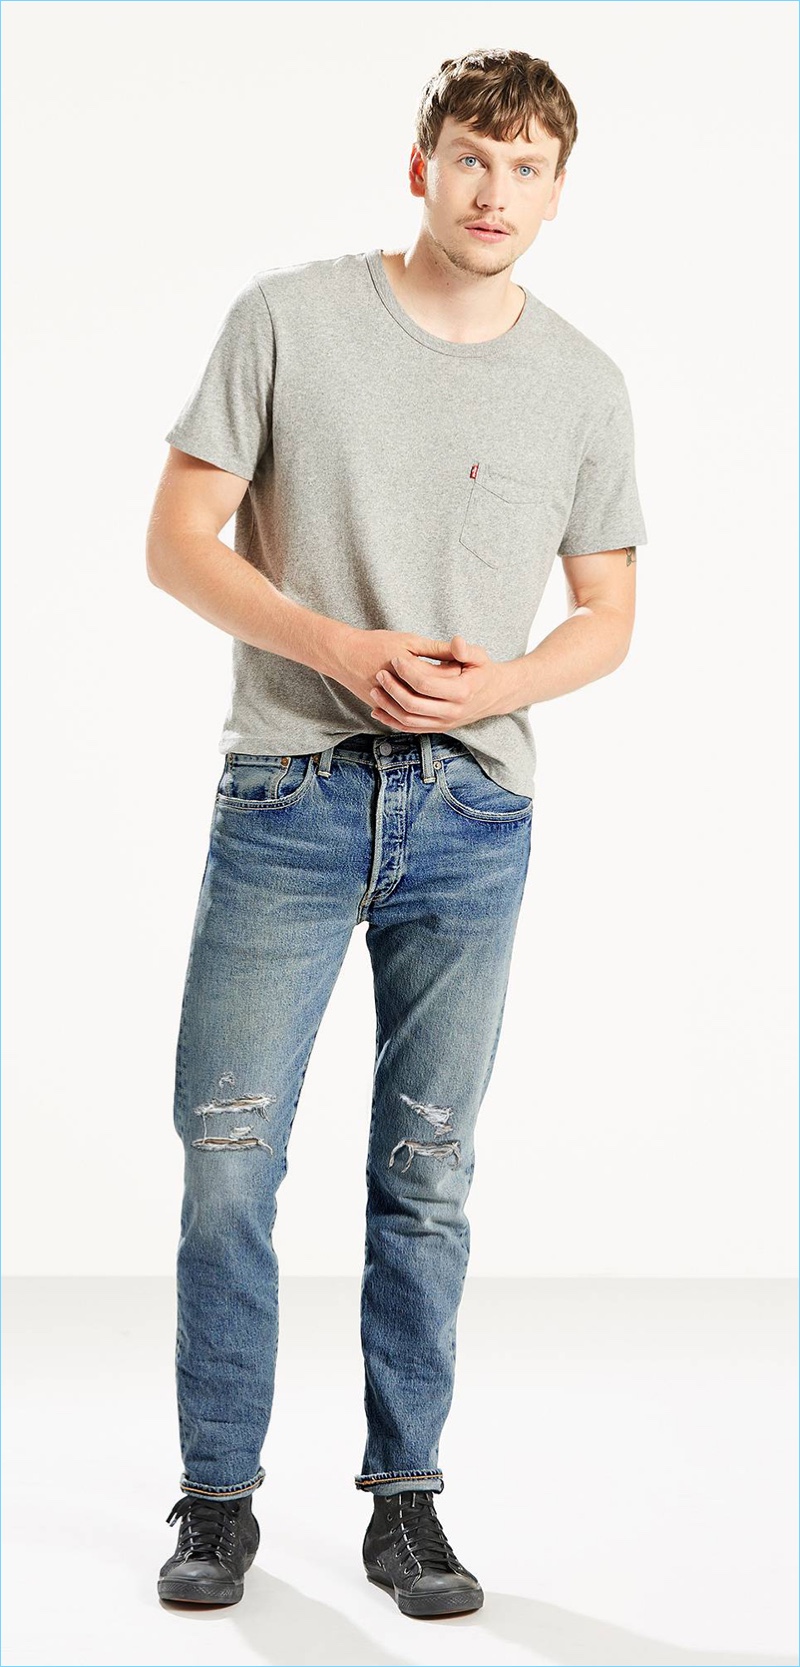 Ripped denim is front and center with Levi's 501 skinny jeans Bad Boy style.